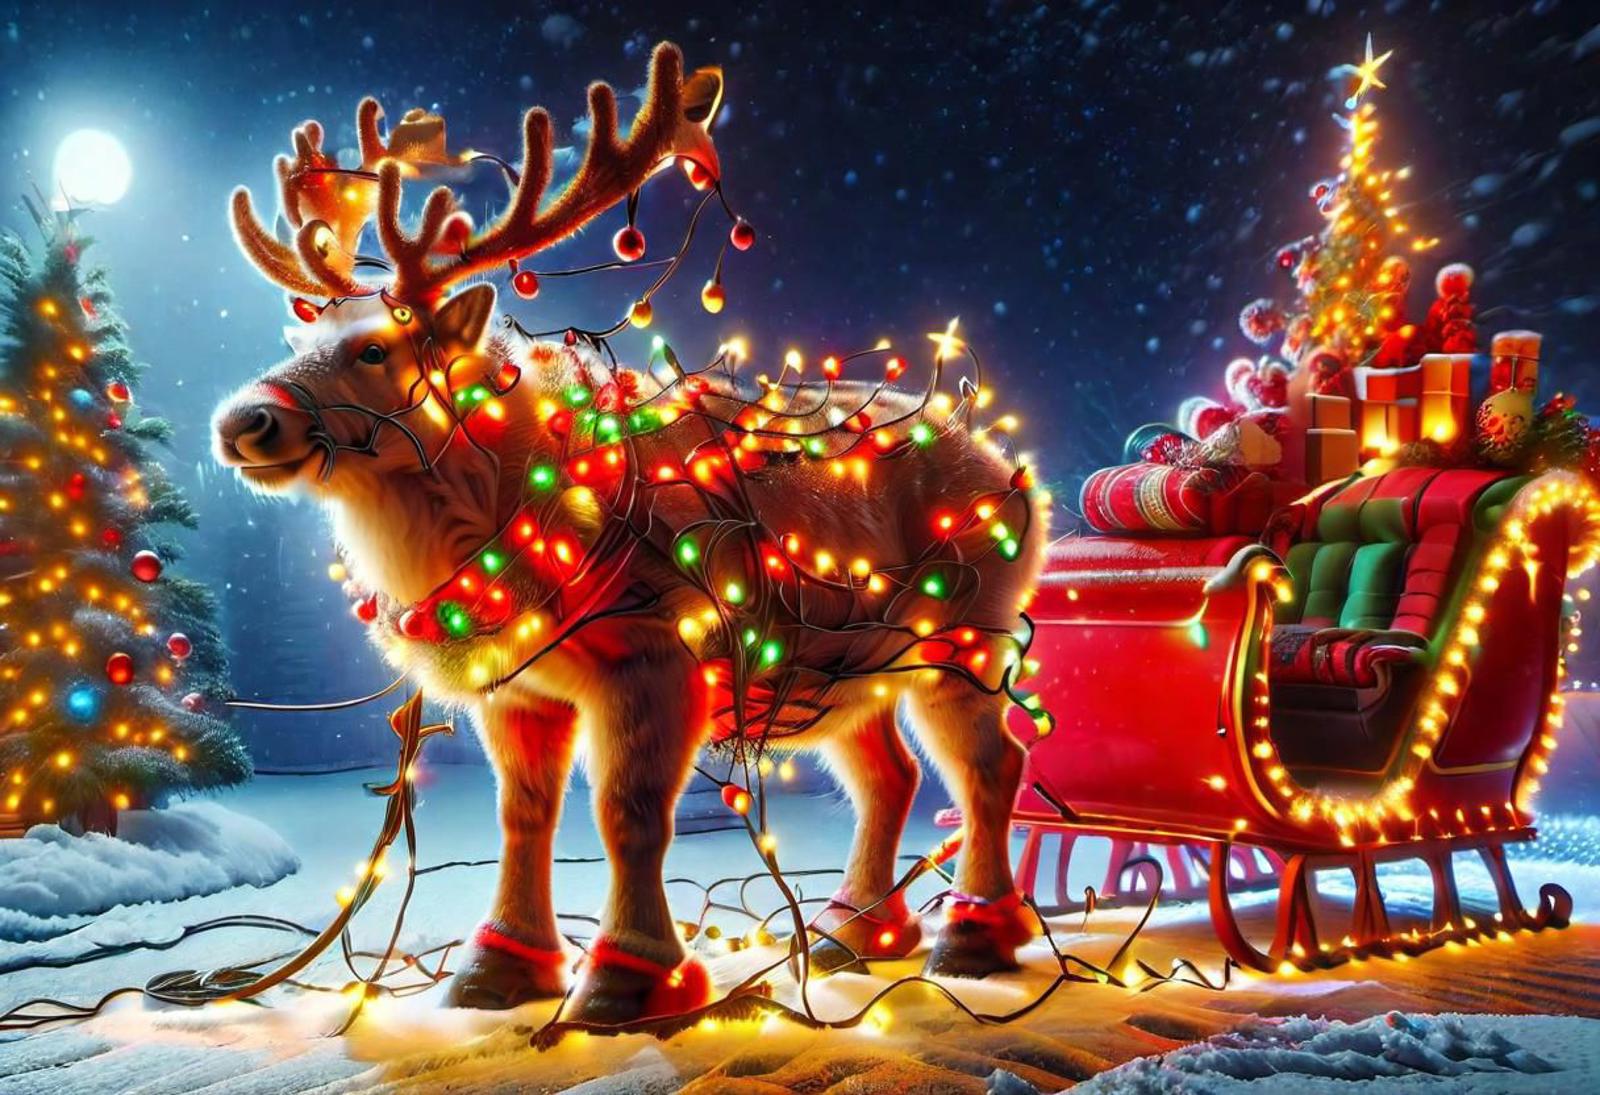 Illustration of a reindeer wearing Christmas lights and standing in the snow.